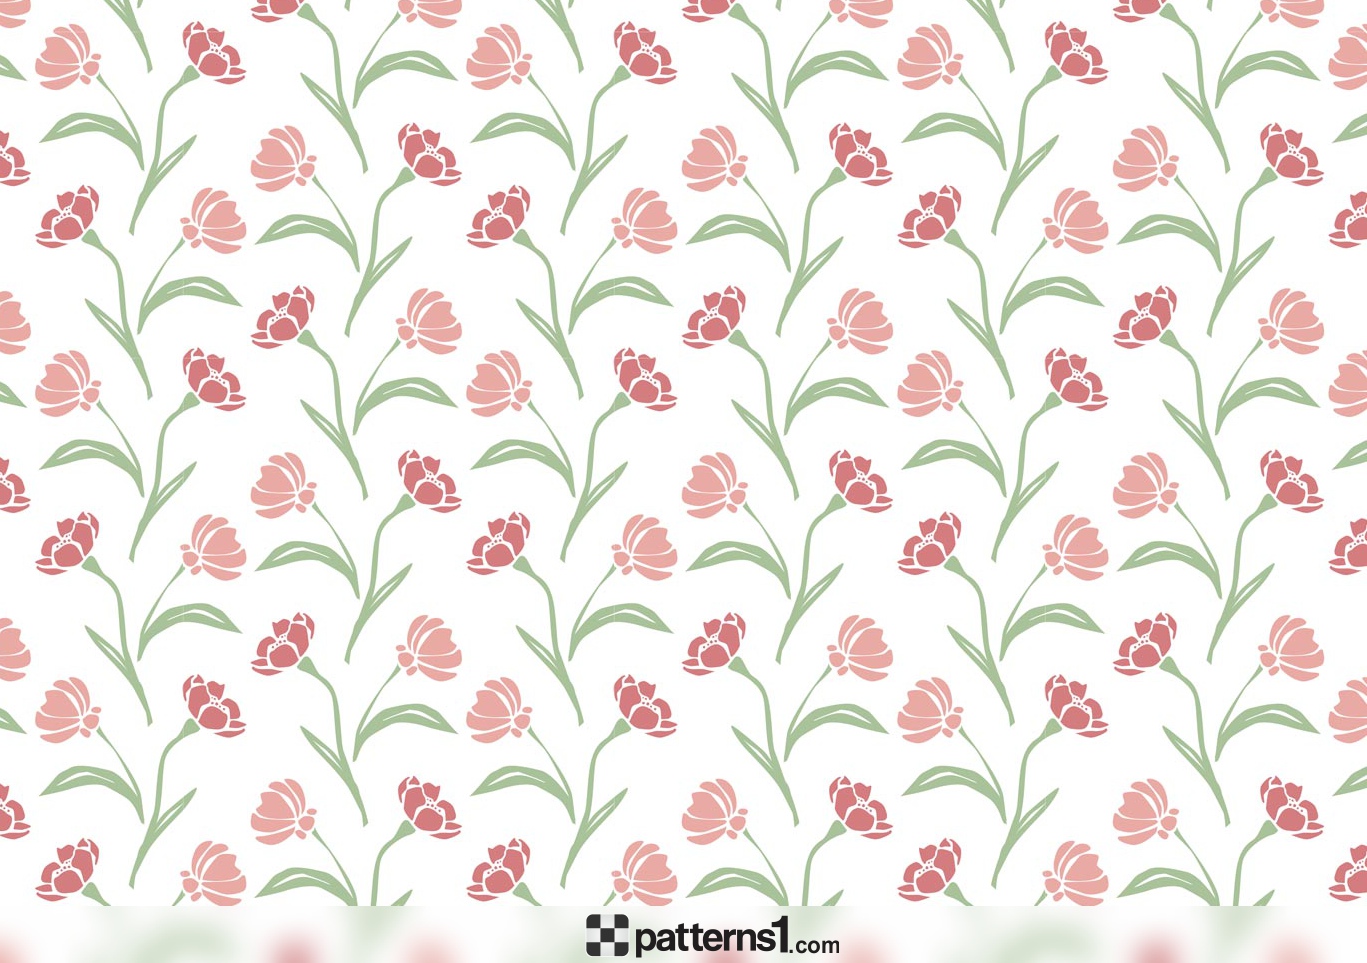 Free Background Floral Cliparts, Download Free Clip Art, Free Clip Art